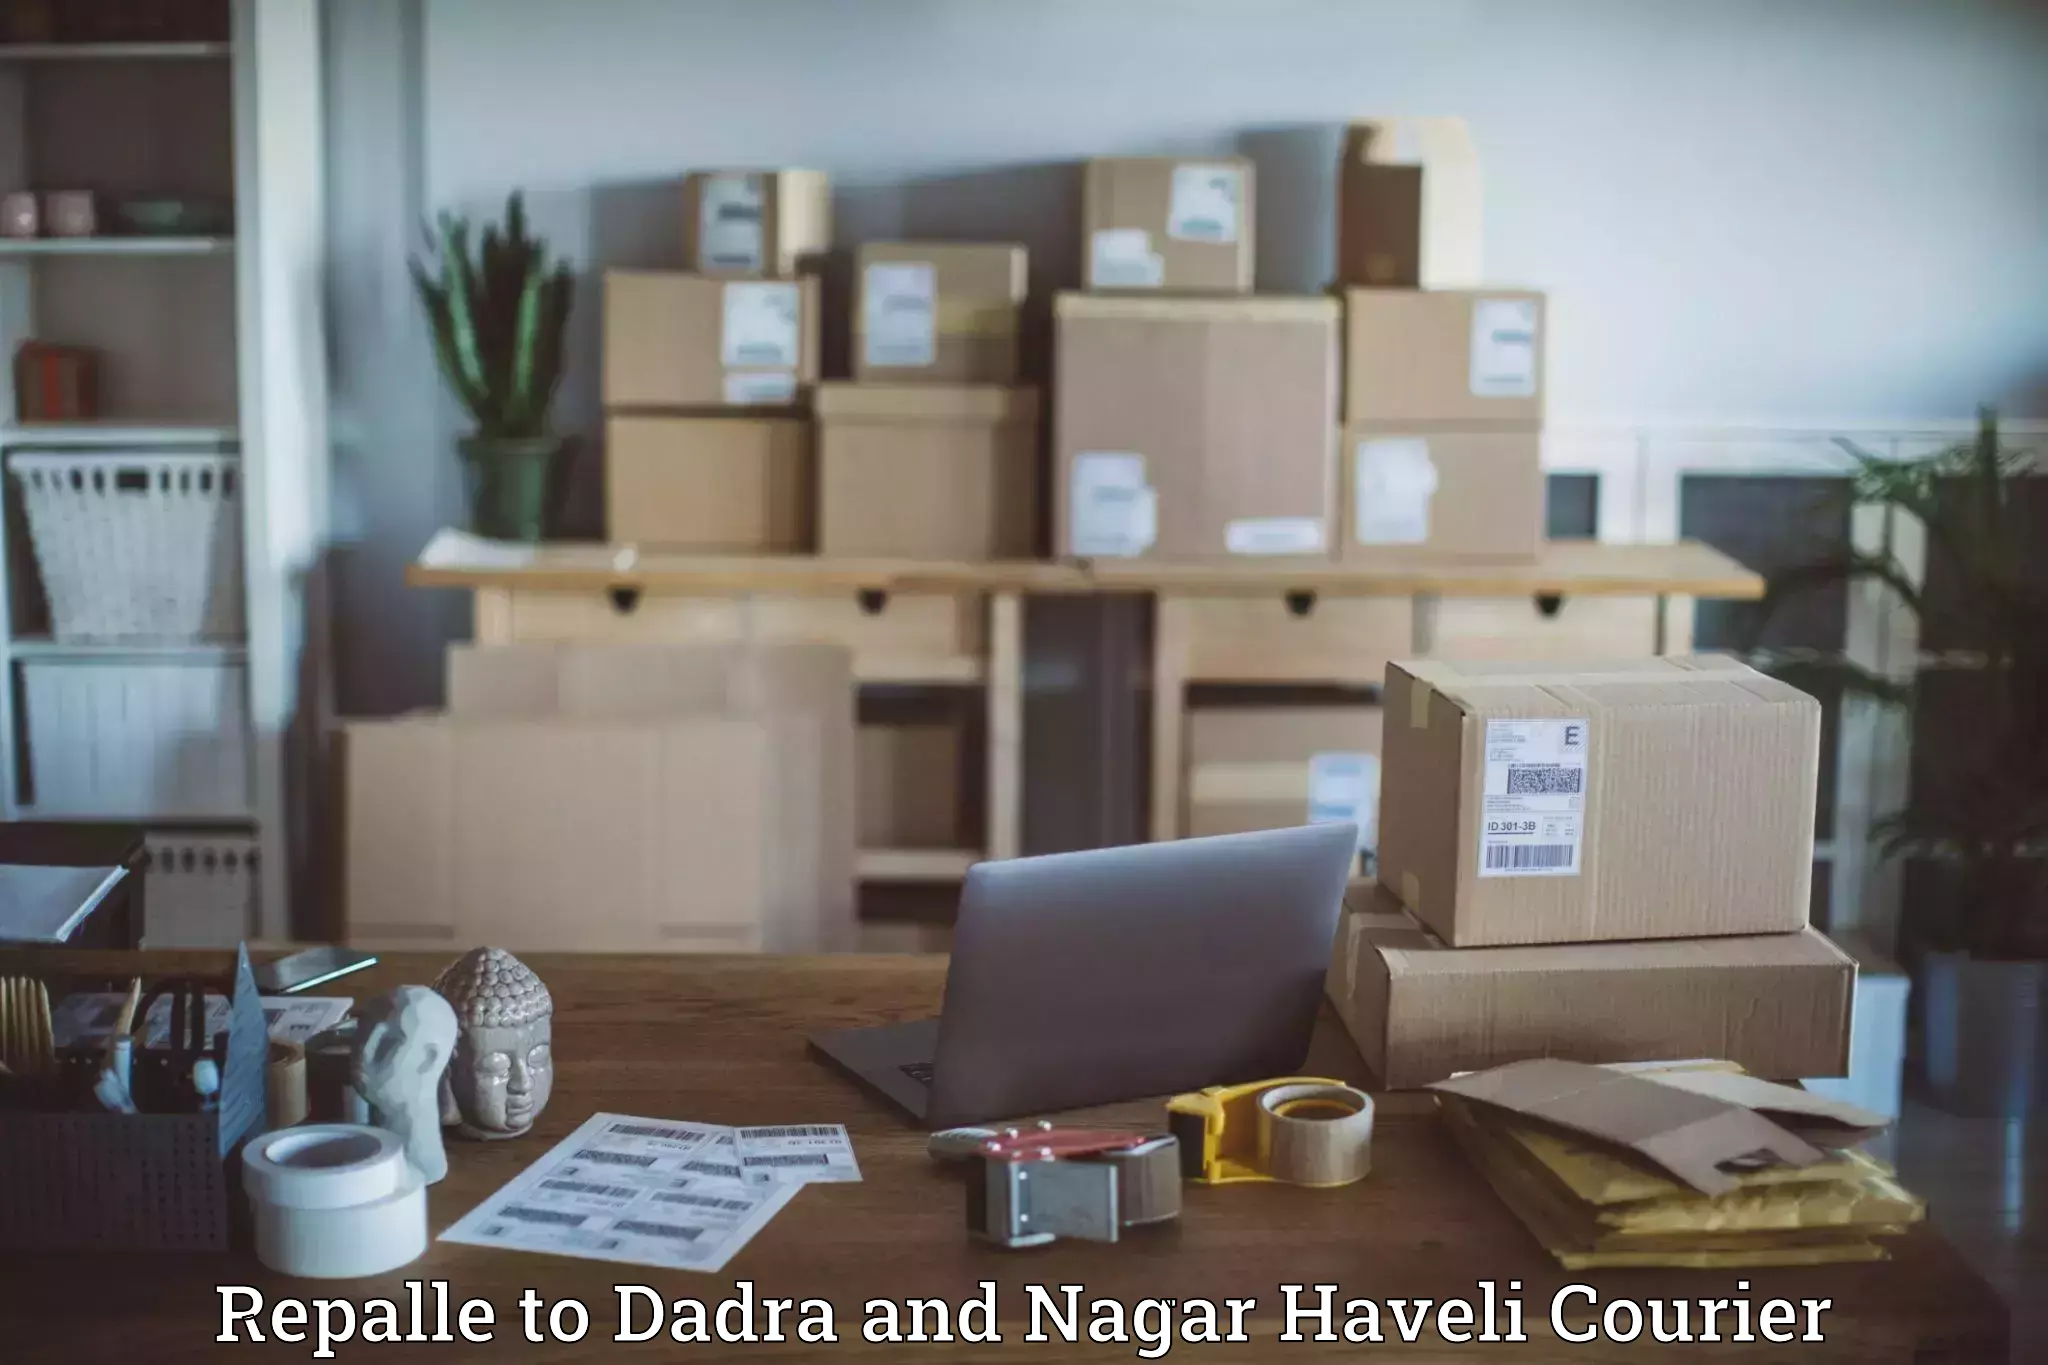 Overnight delivery services Repalle to Dadra and Nagar Haveli